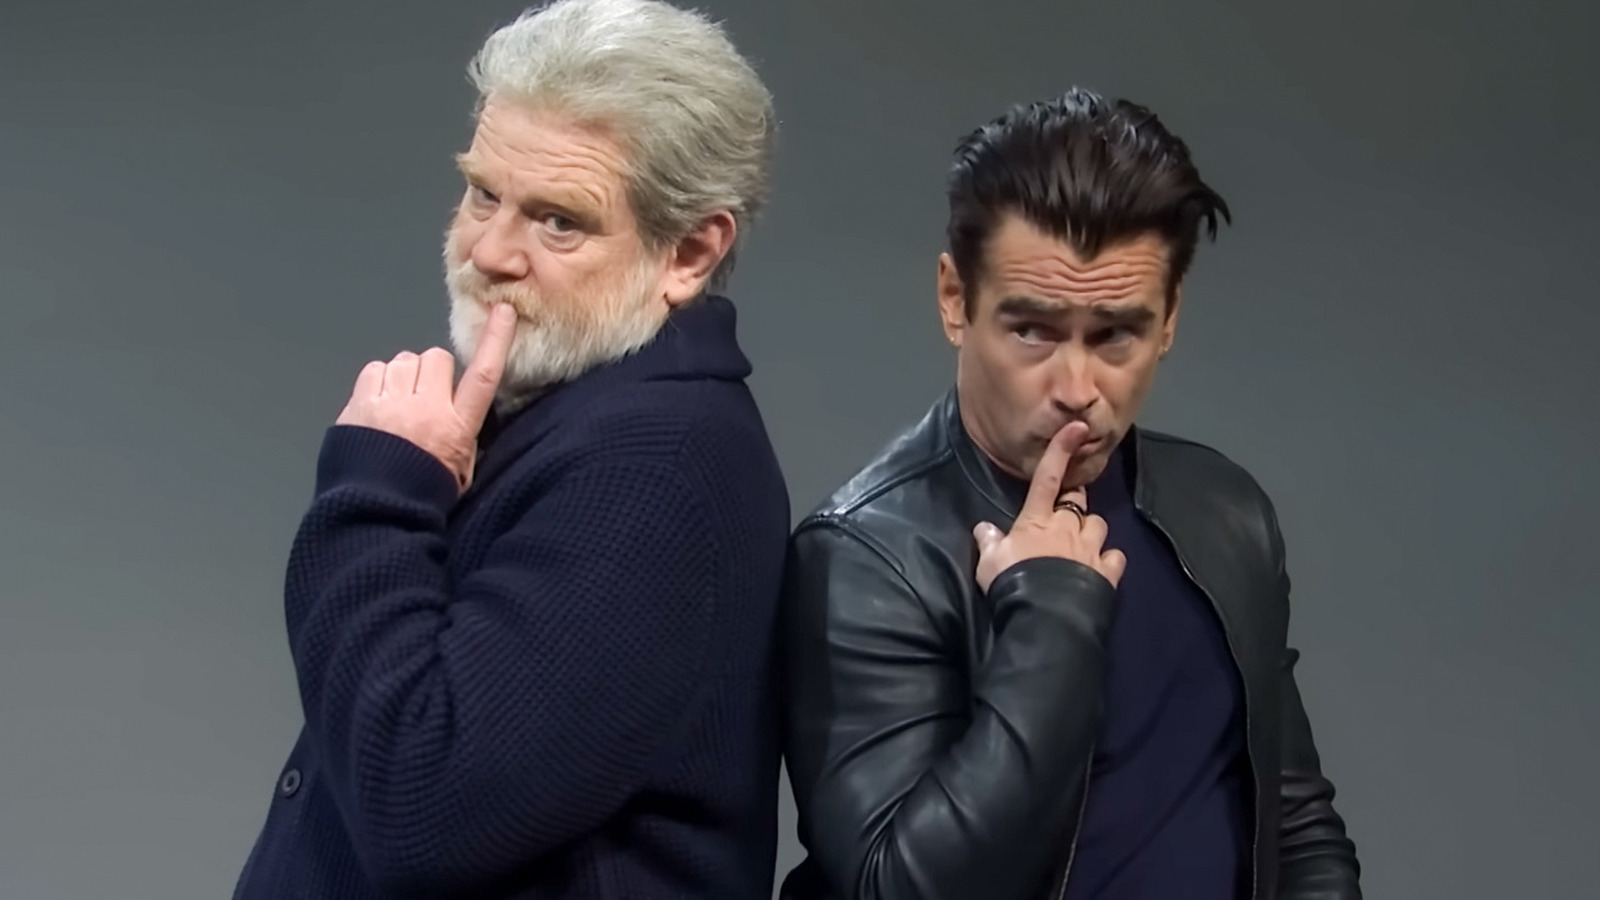 SNL Showcases Brendan Gleeson And Colin Farrell As Best Friends And